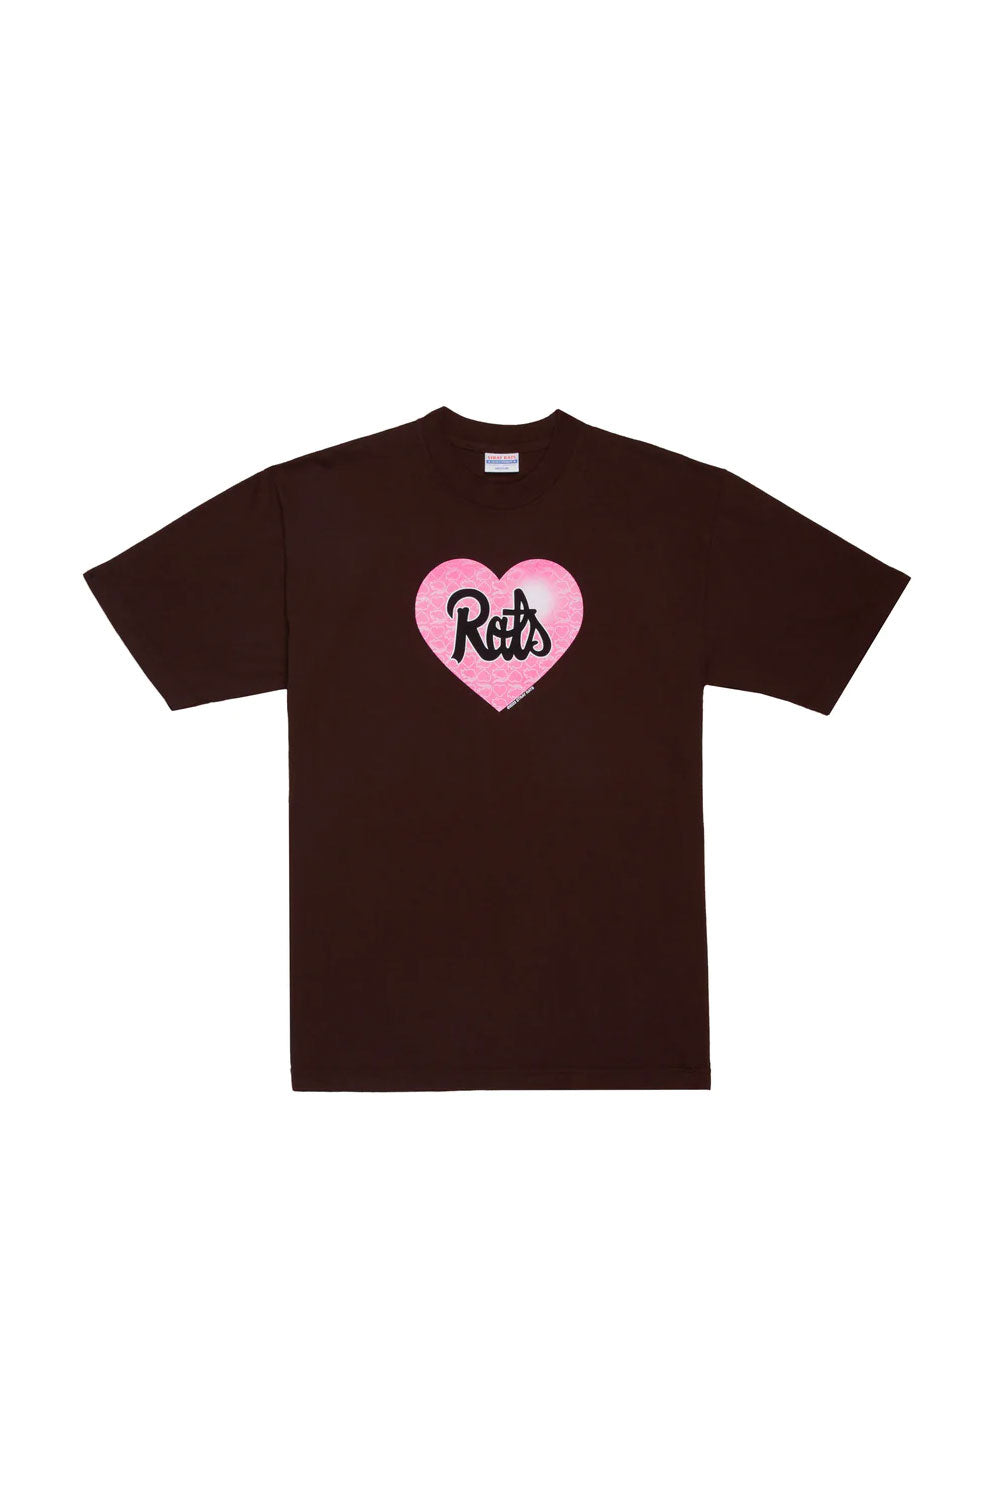 The STRAY RATS - RAT HEART TEE BROWN available online with global shipping, and in PAM Stores Melbourne and Sydney.